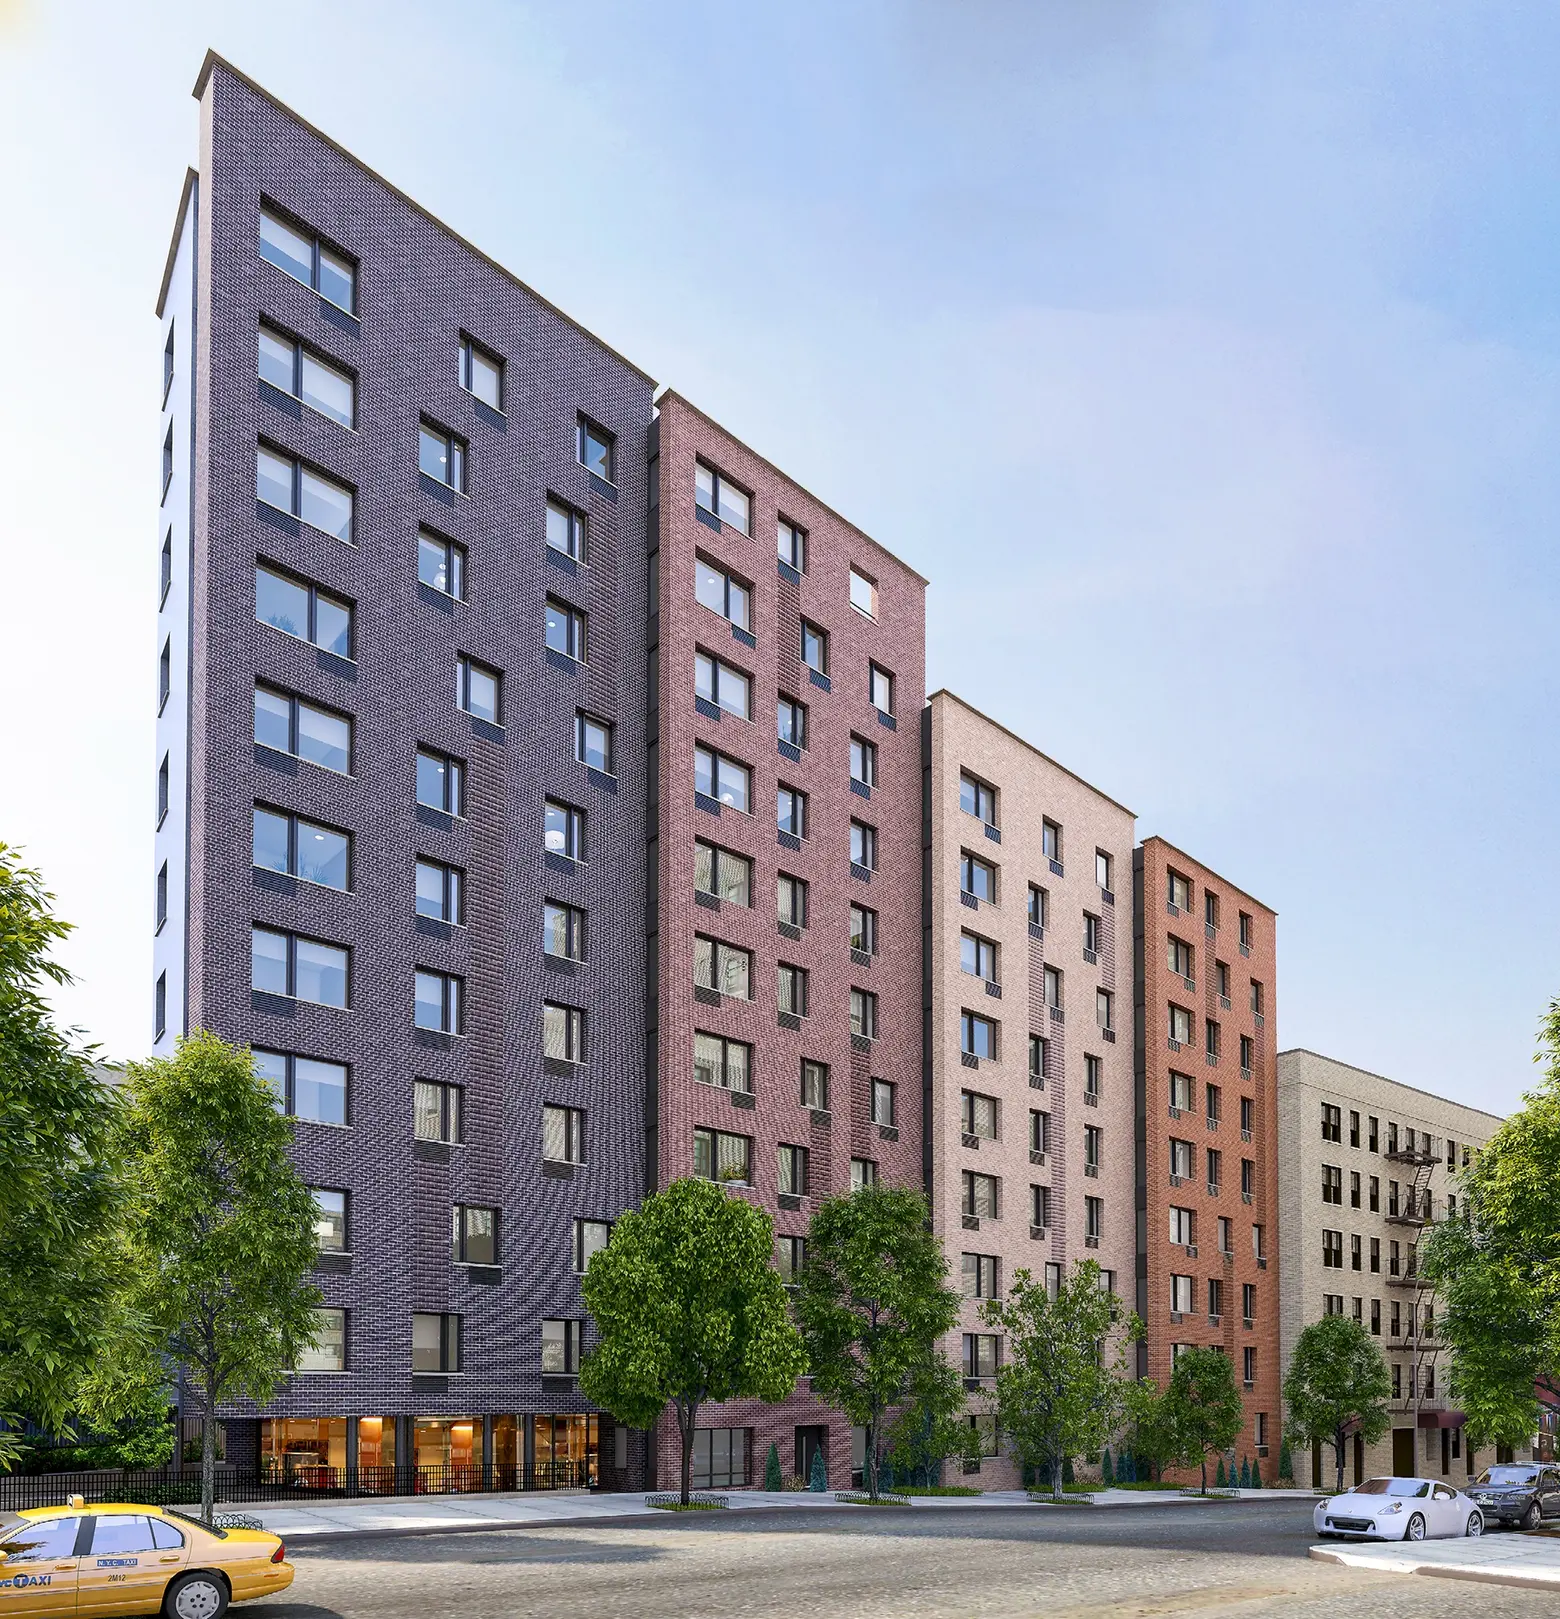 Apply for 50 affordable units in the Bronx’s Mt. Eden, from $558/month